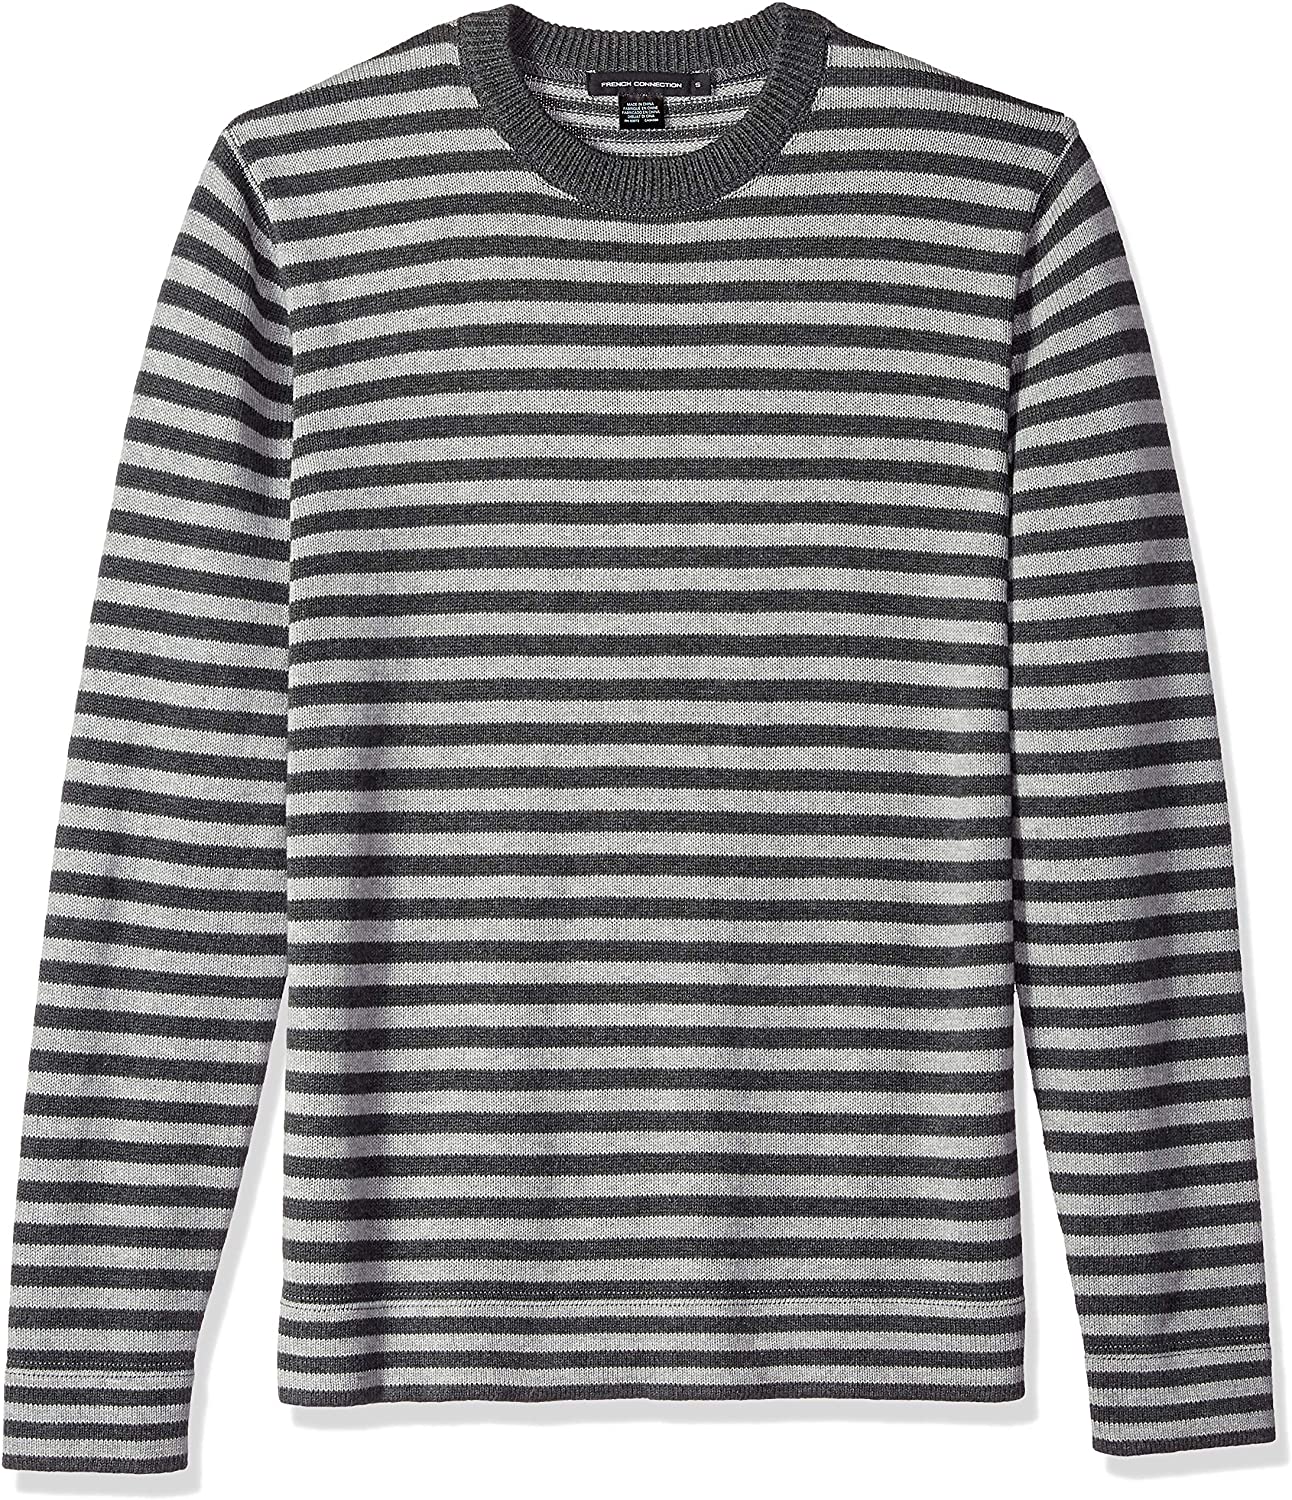 French Connection Men's Long Sleeve Stripe Crew Neck Sweater